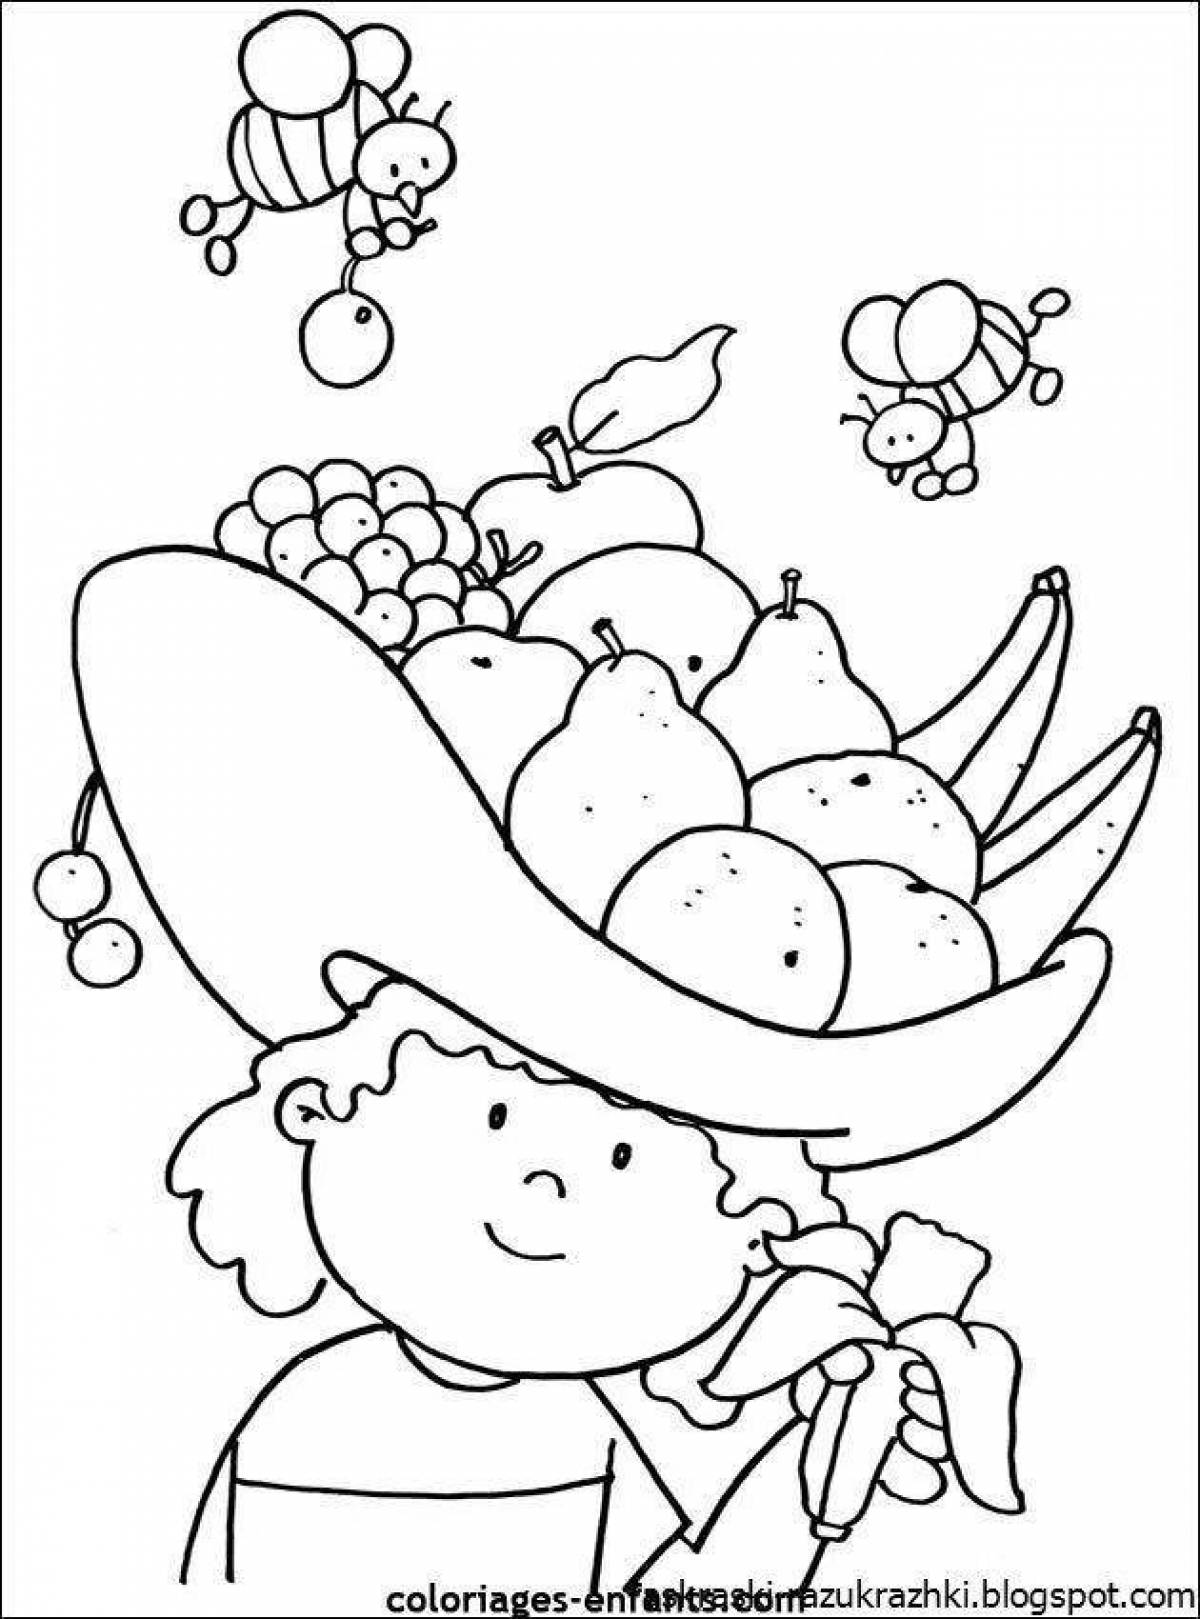 Glitter coloring book about proper nutrition